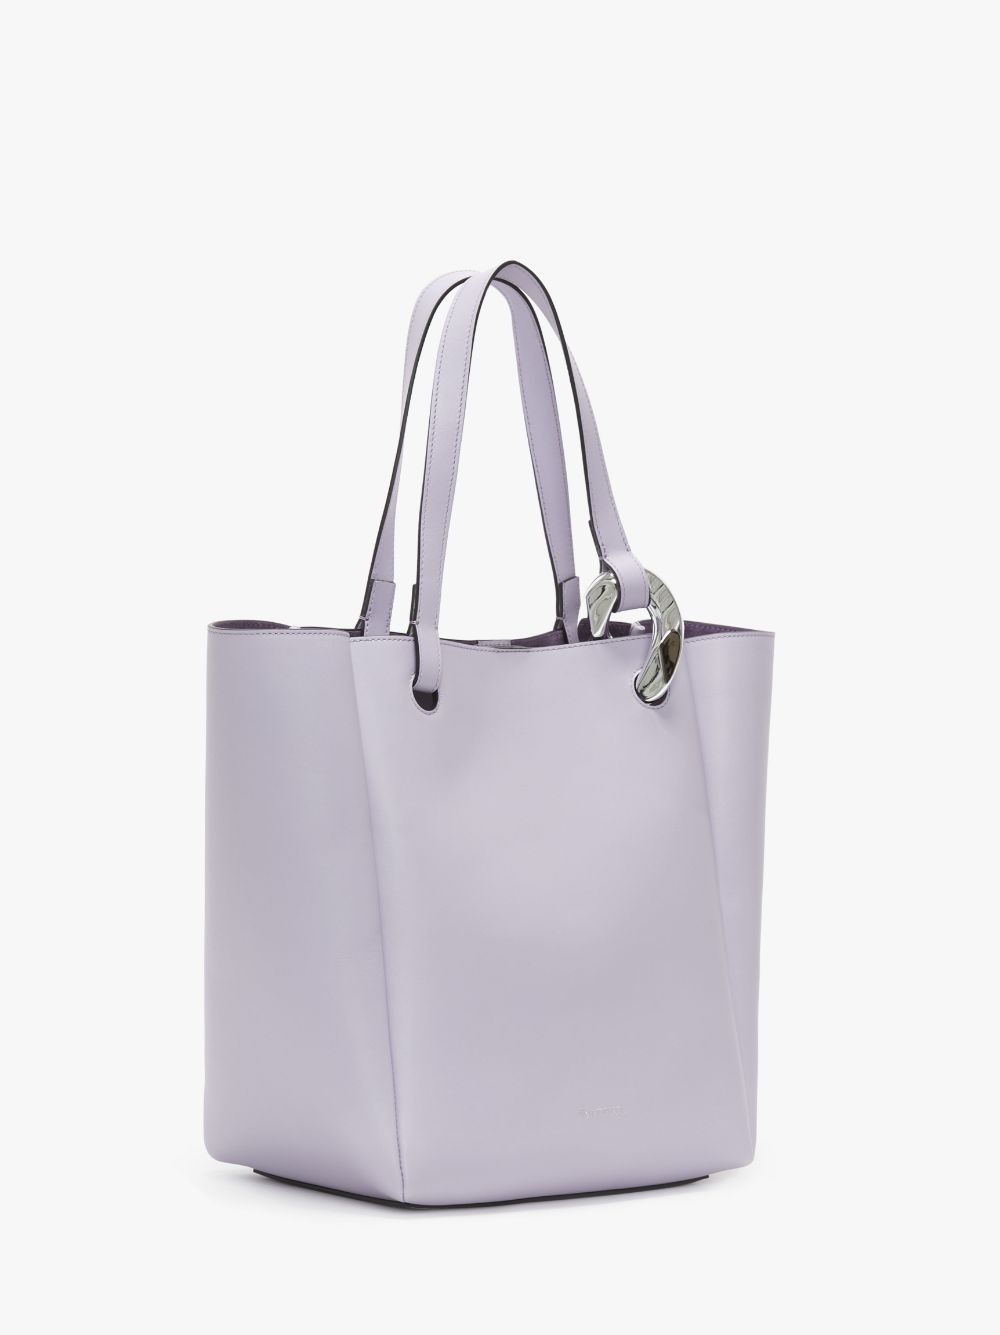 JW Anderson Small Chain-Link Tote Bag - White